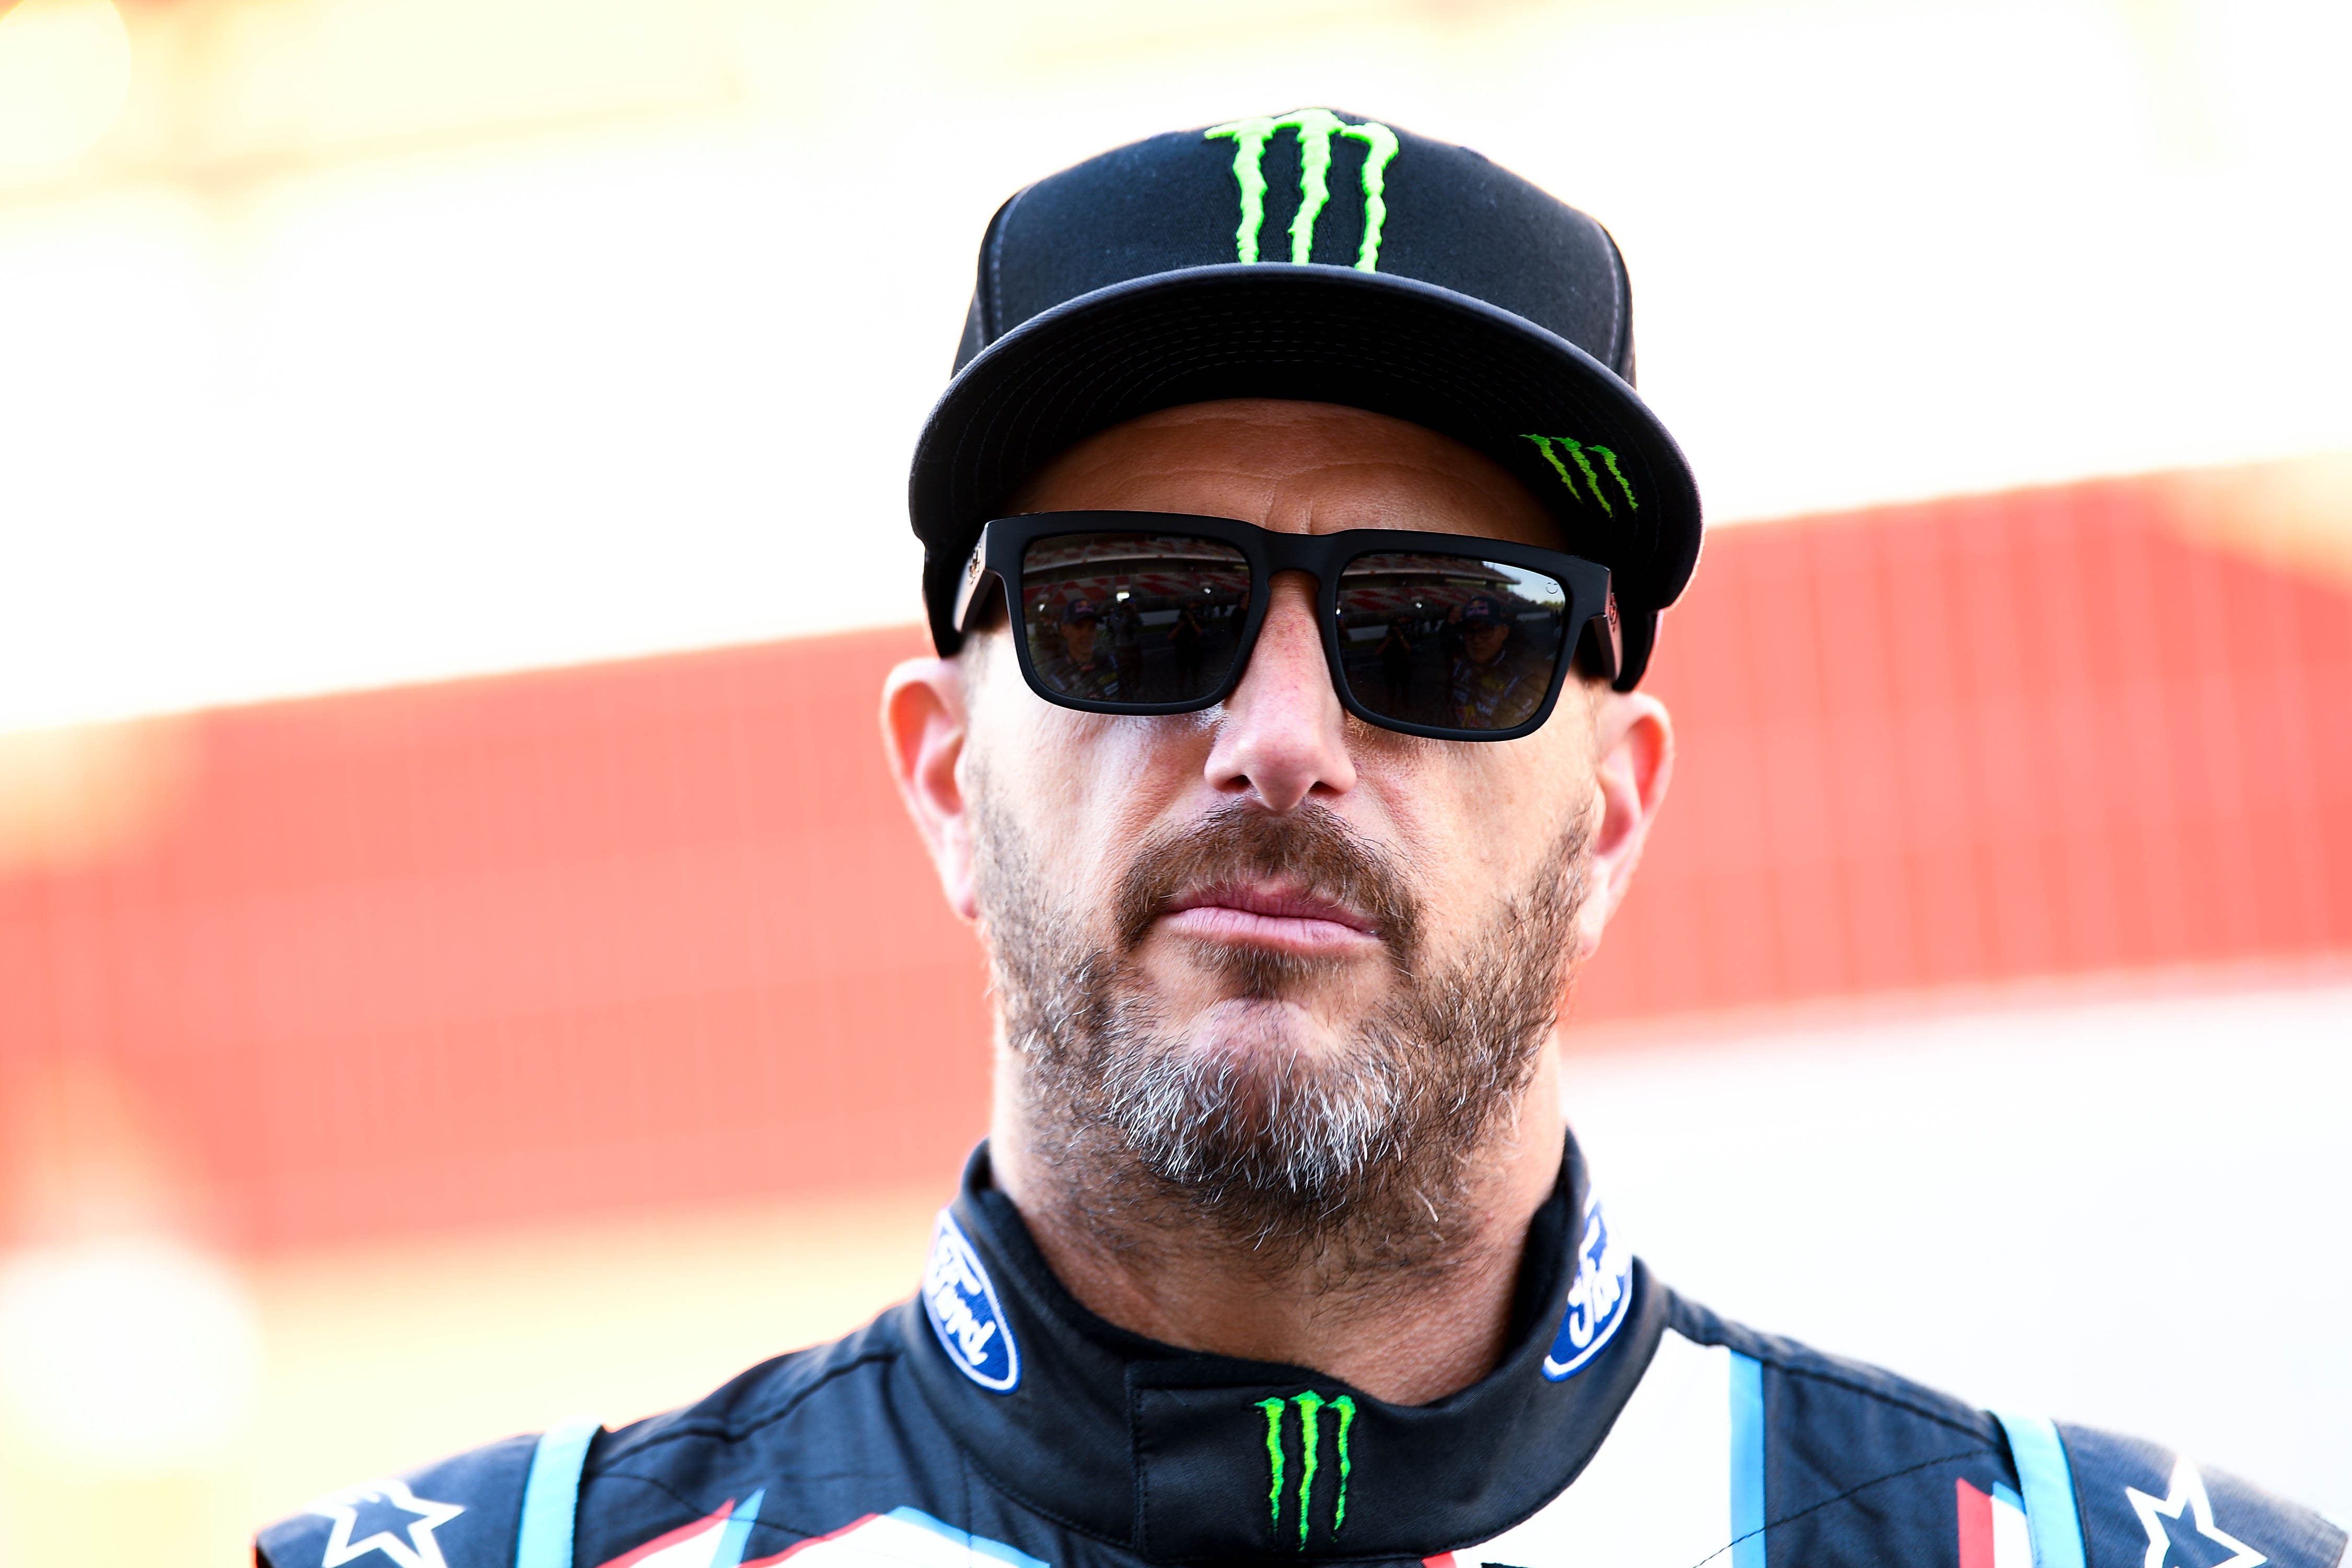 , How Ken Block made chilling admission about ‘difficulty handling fear’ before tragic snowmobile death